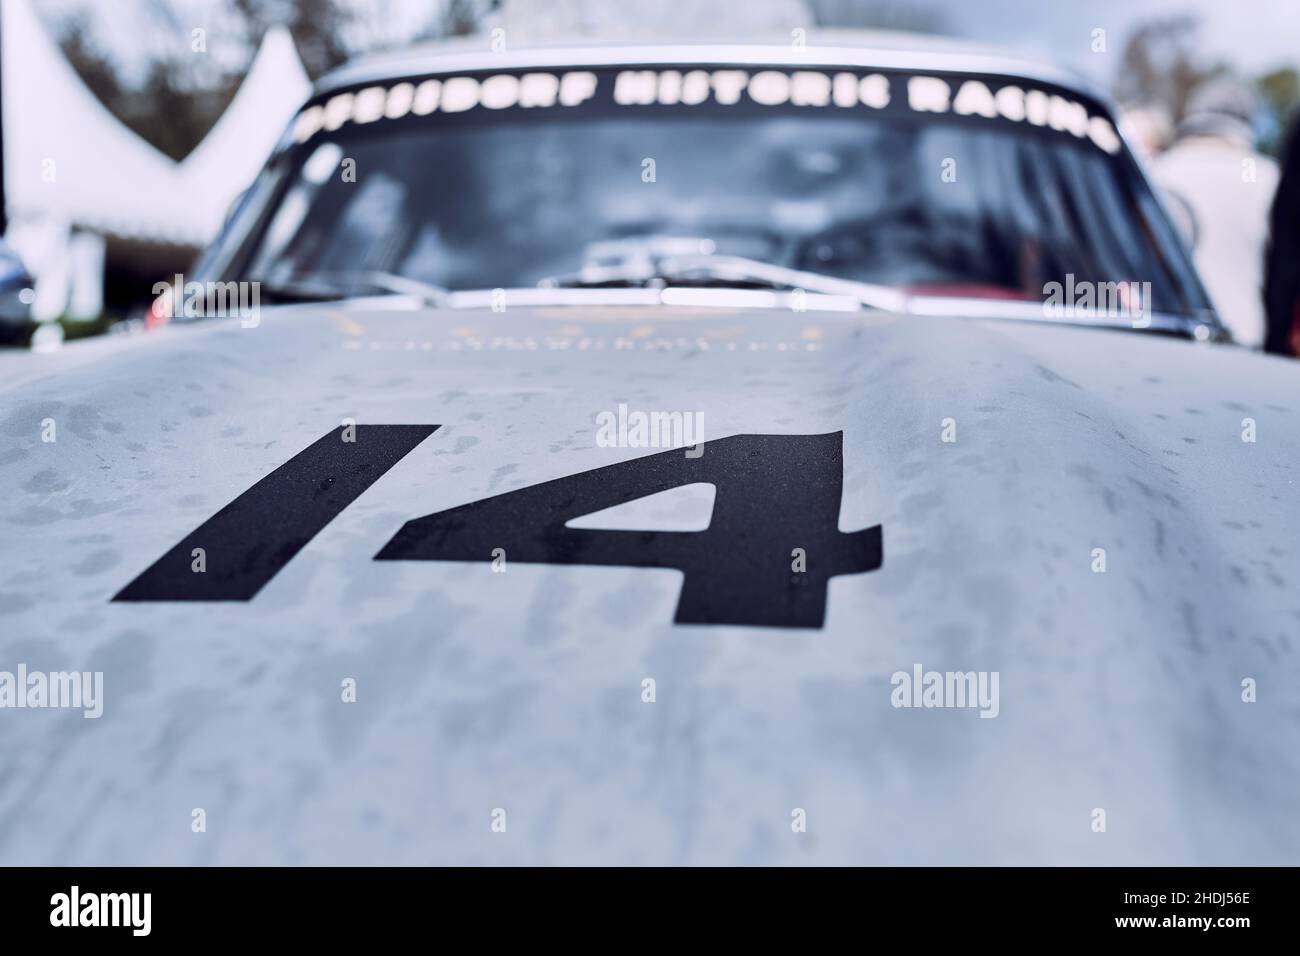 oldtimer, race number, 14, oldtimers, race numbers, fourteen Stock Photo